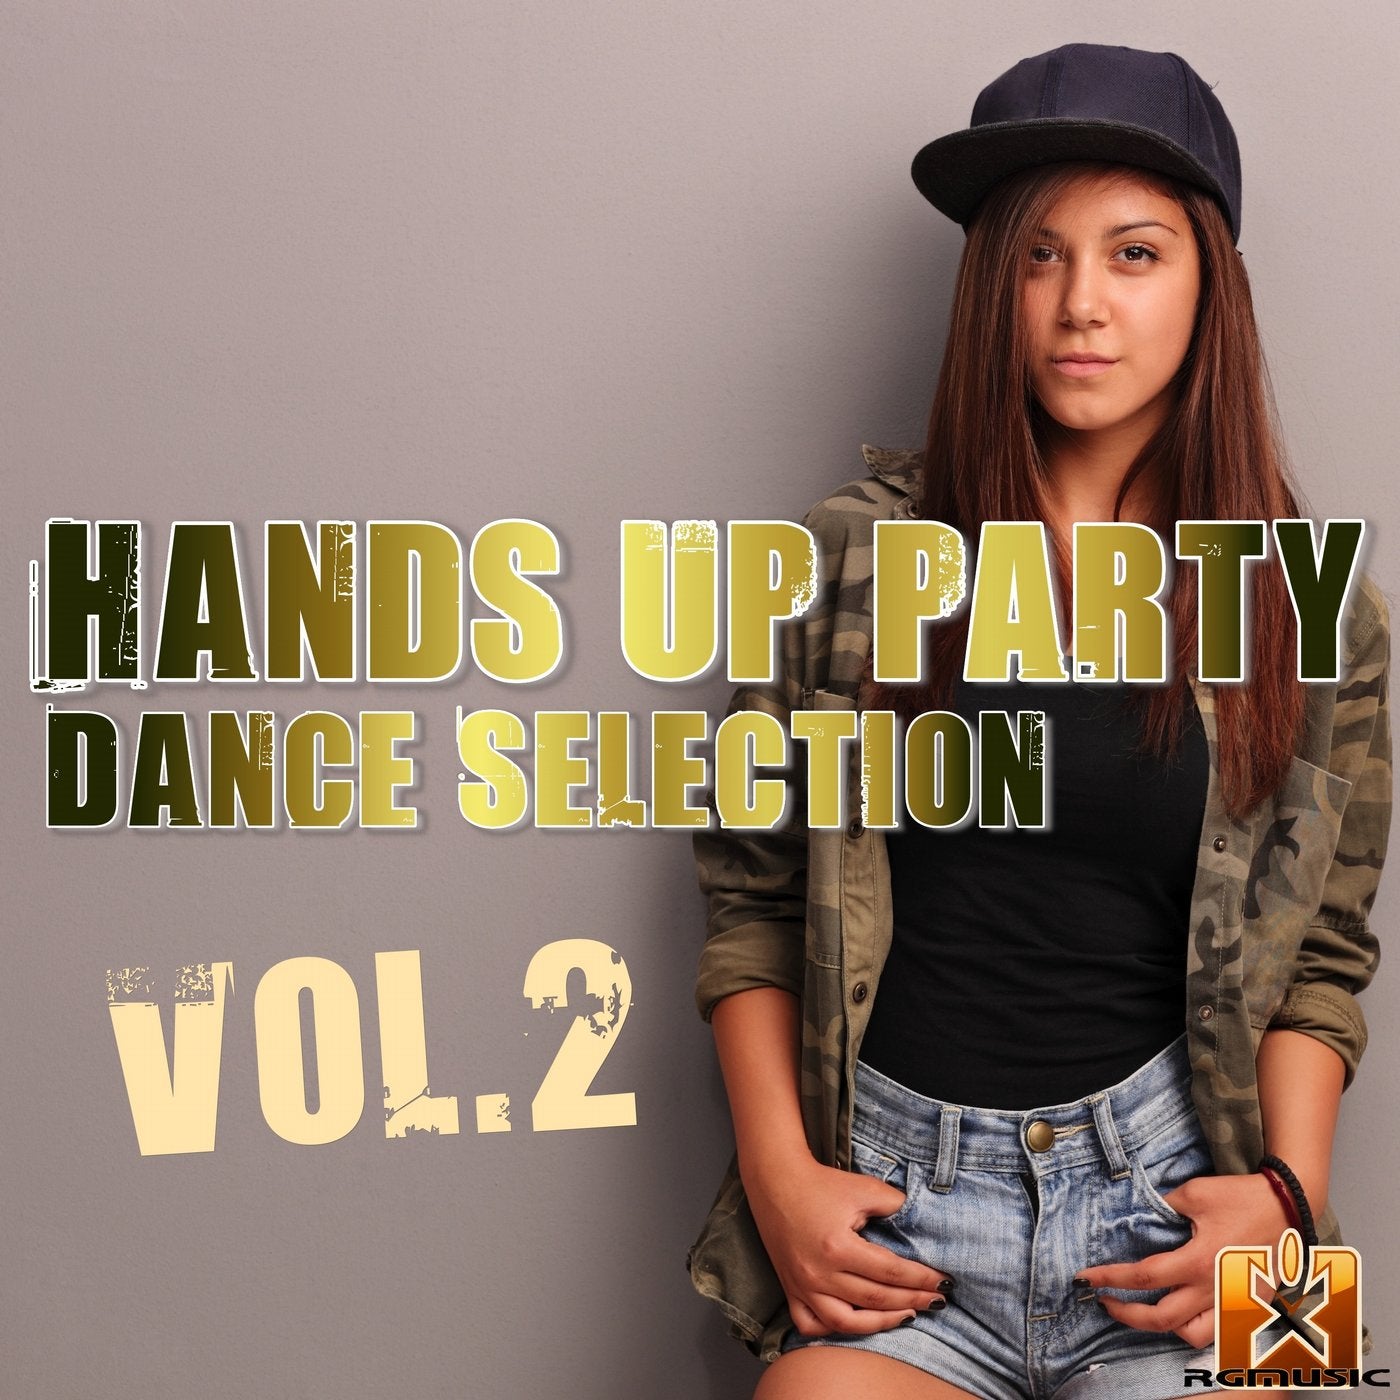 Hands up Party Dance Selection, Vol. 2